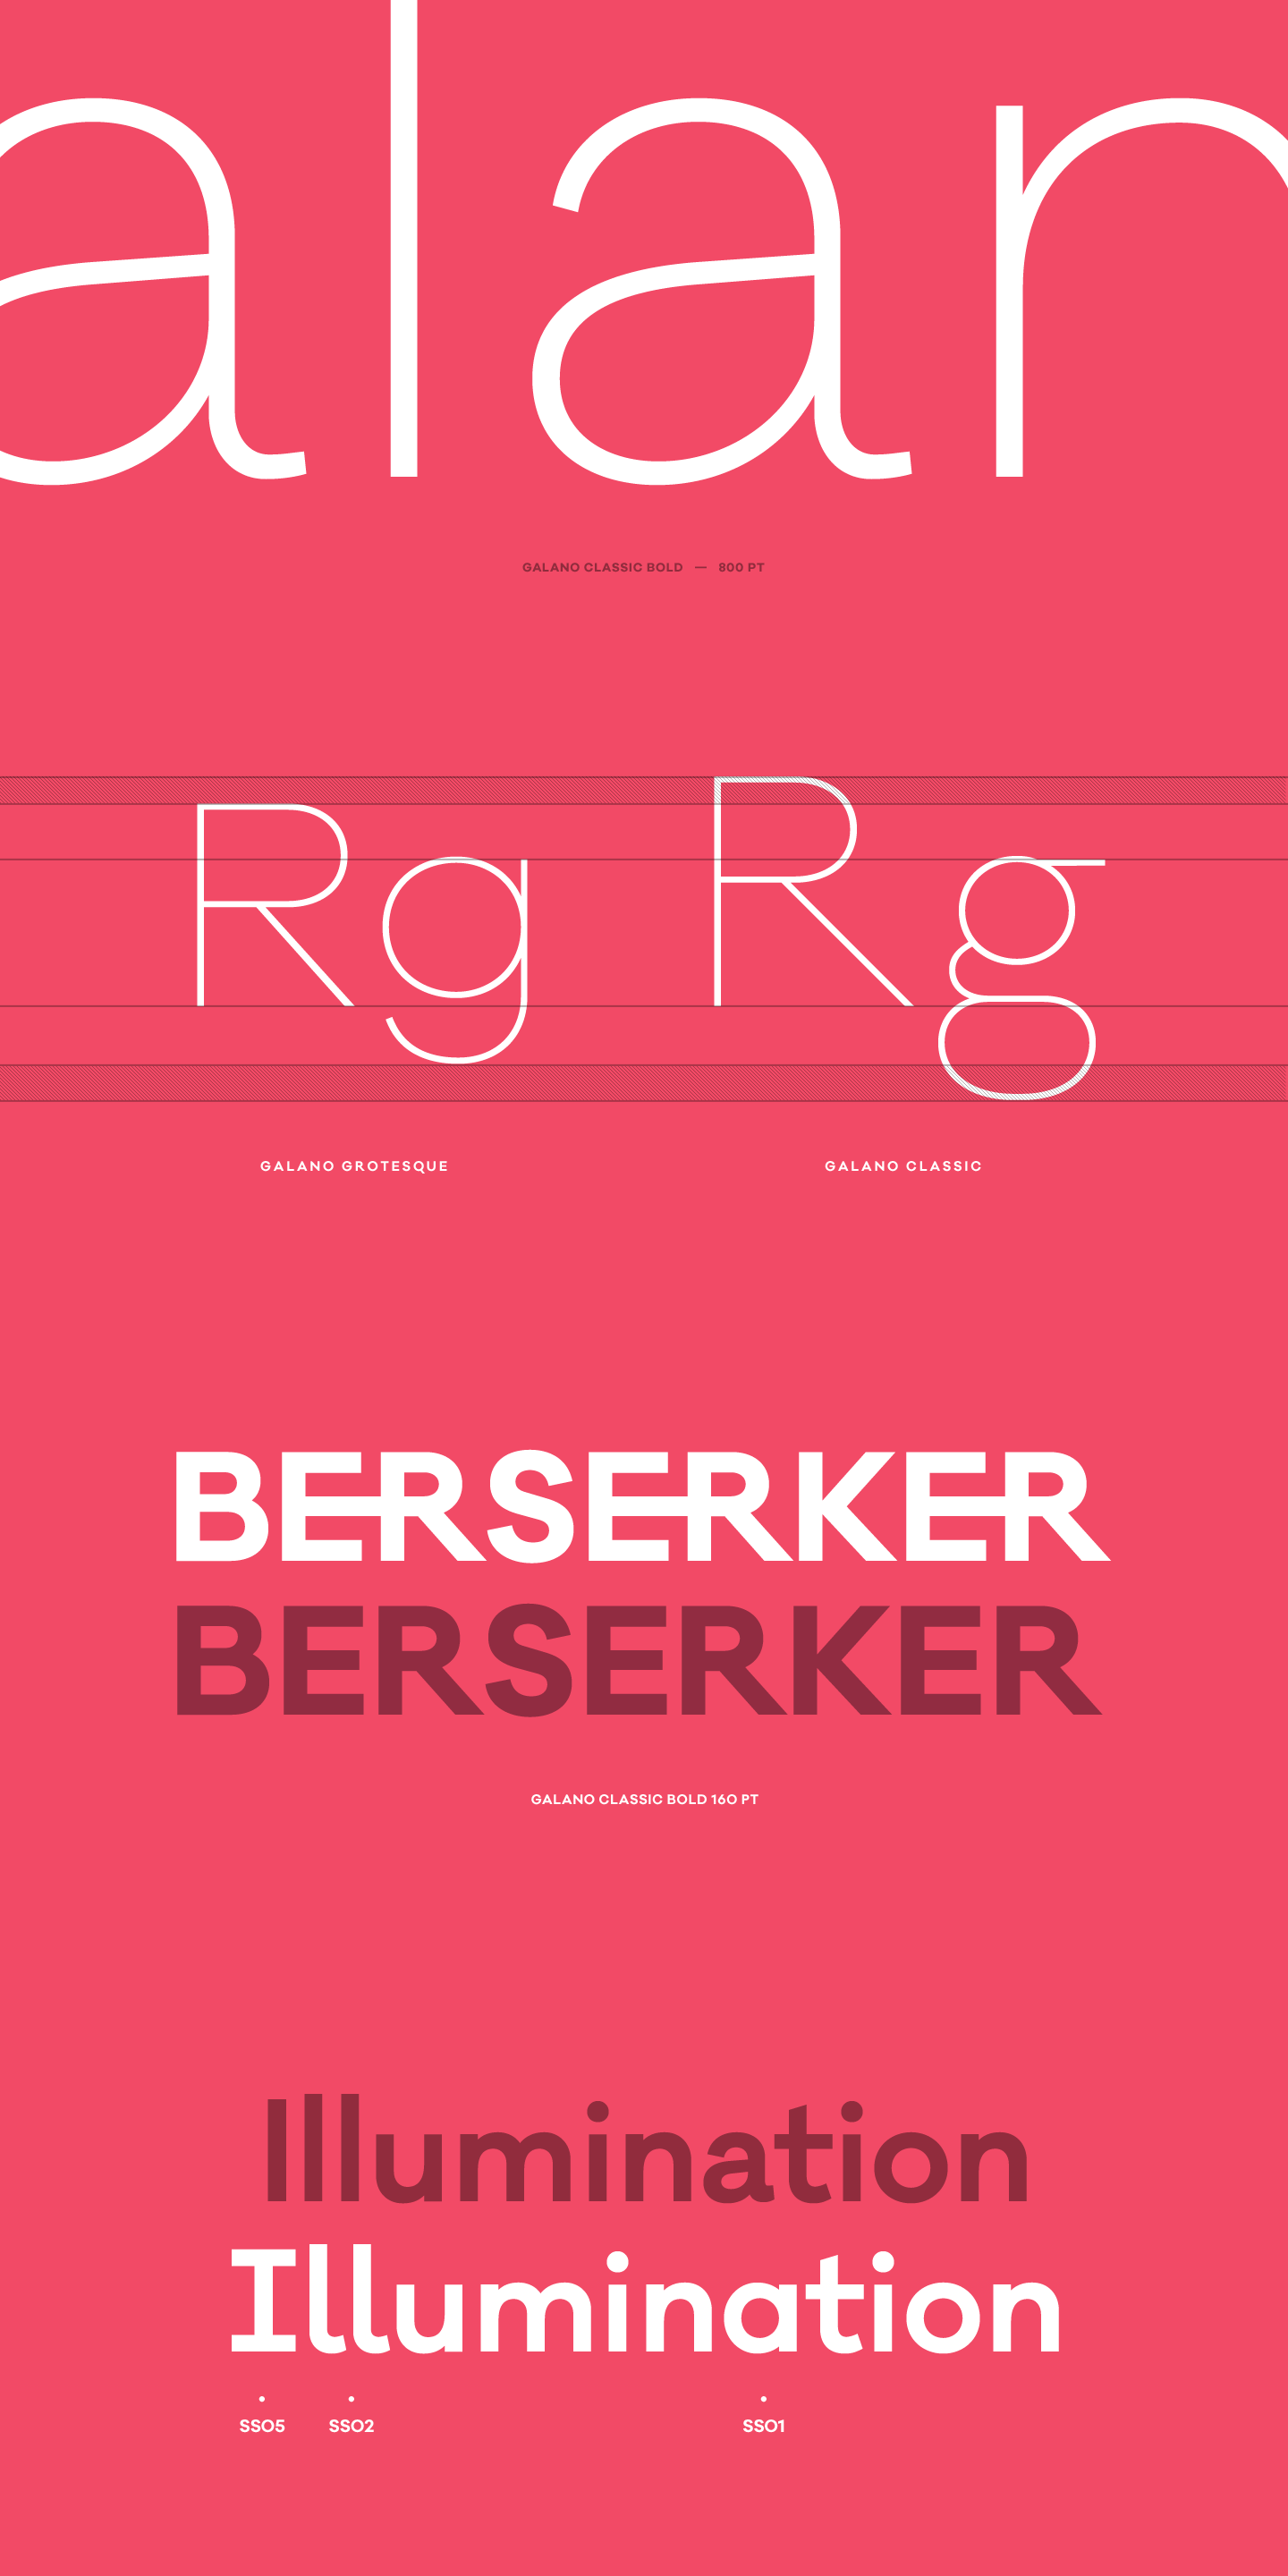 Galano Classic, the display companion of the Galano Grotesque font family by Rene Bieder.